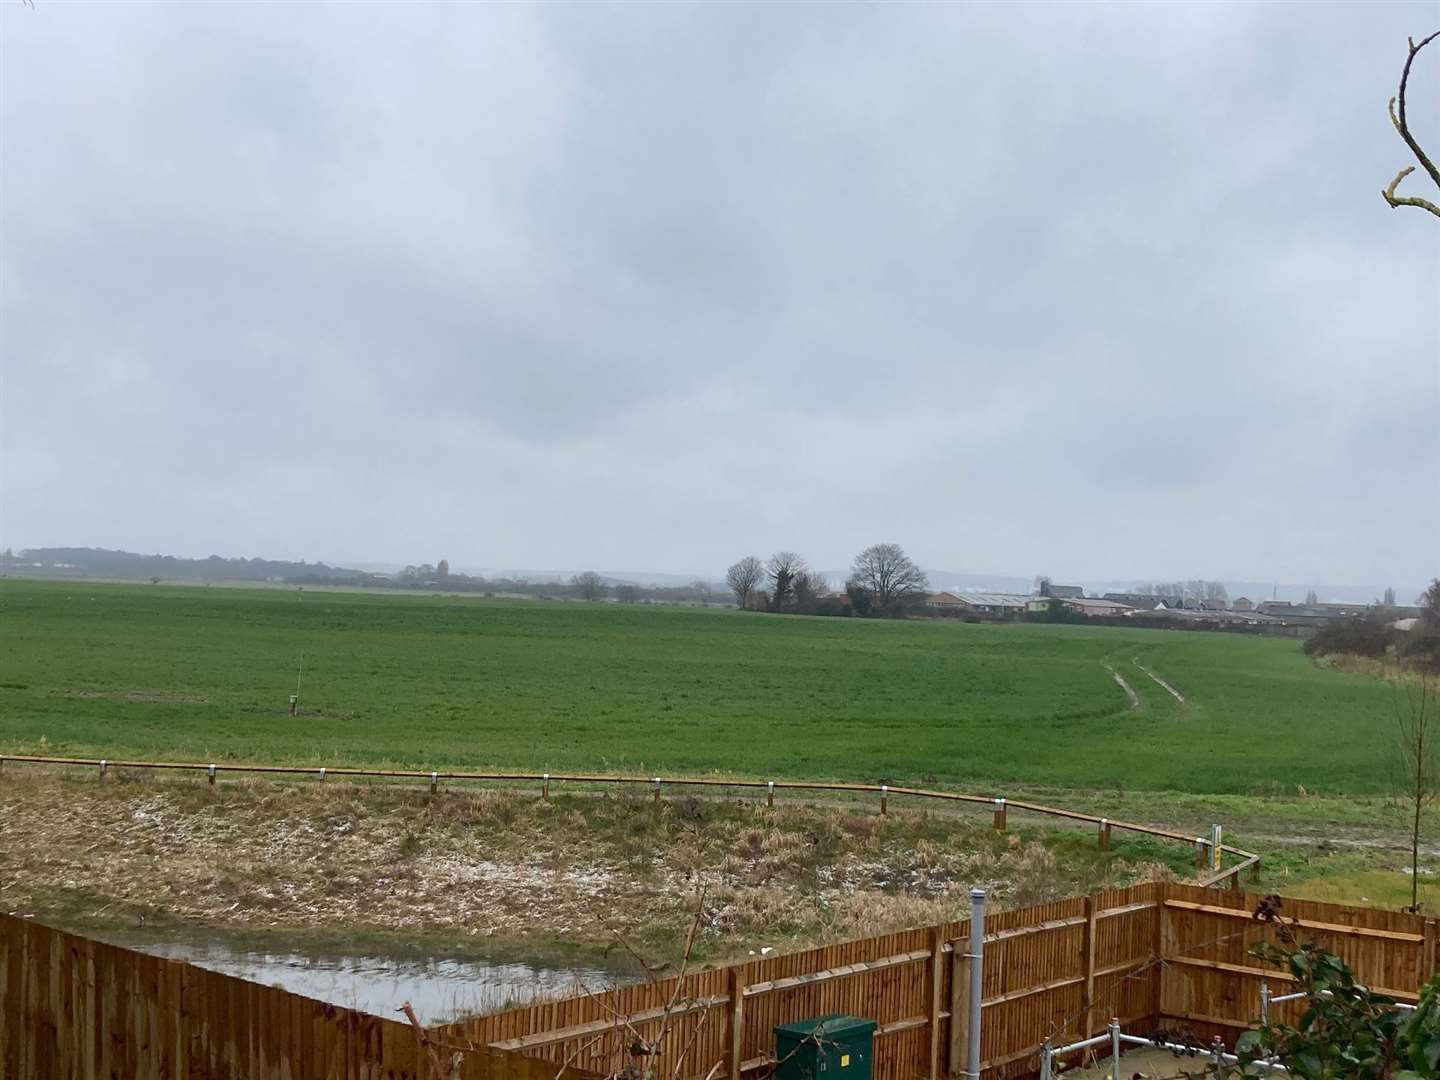 The plot off off Ham Road in Faversham earmarked for 250 homes